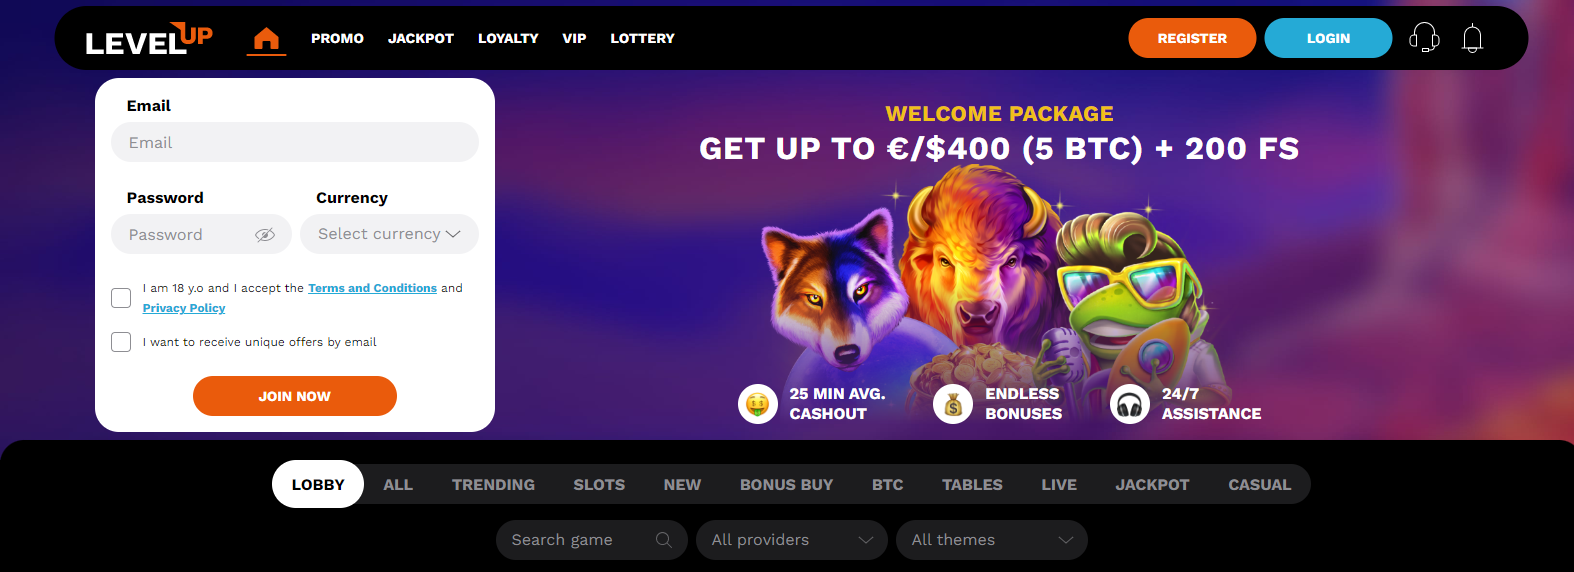 LevelUp Casino Home Page